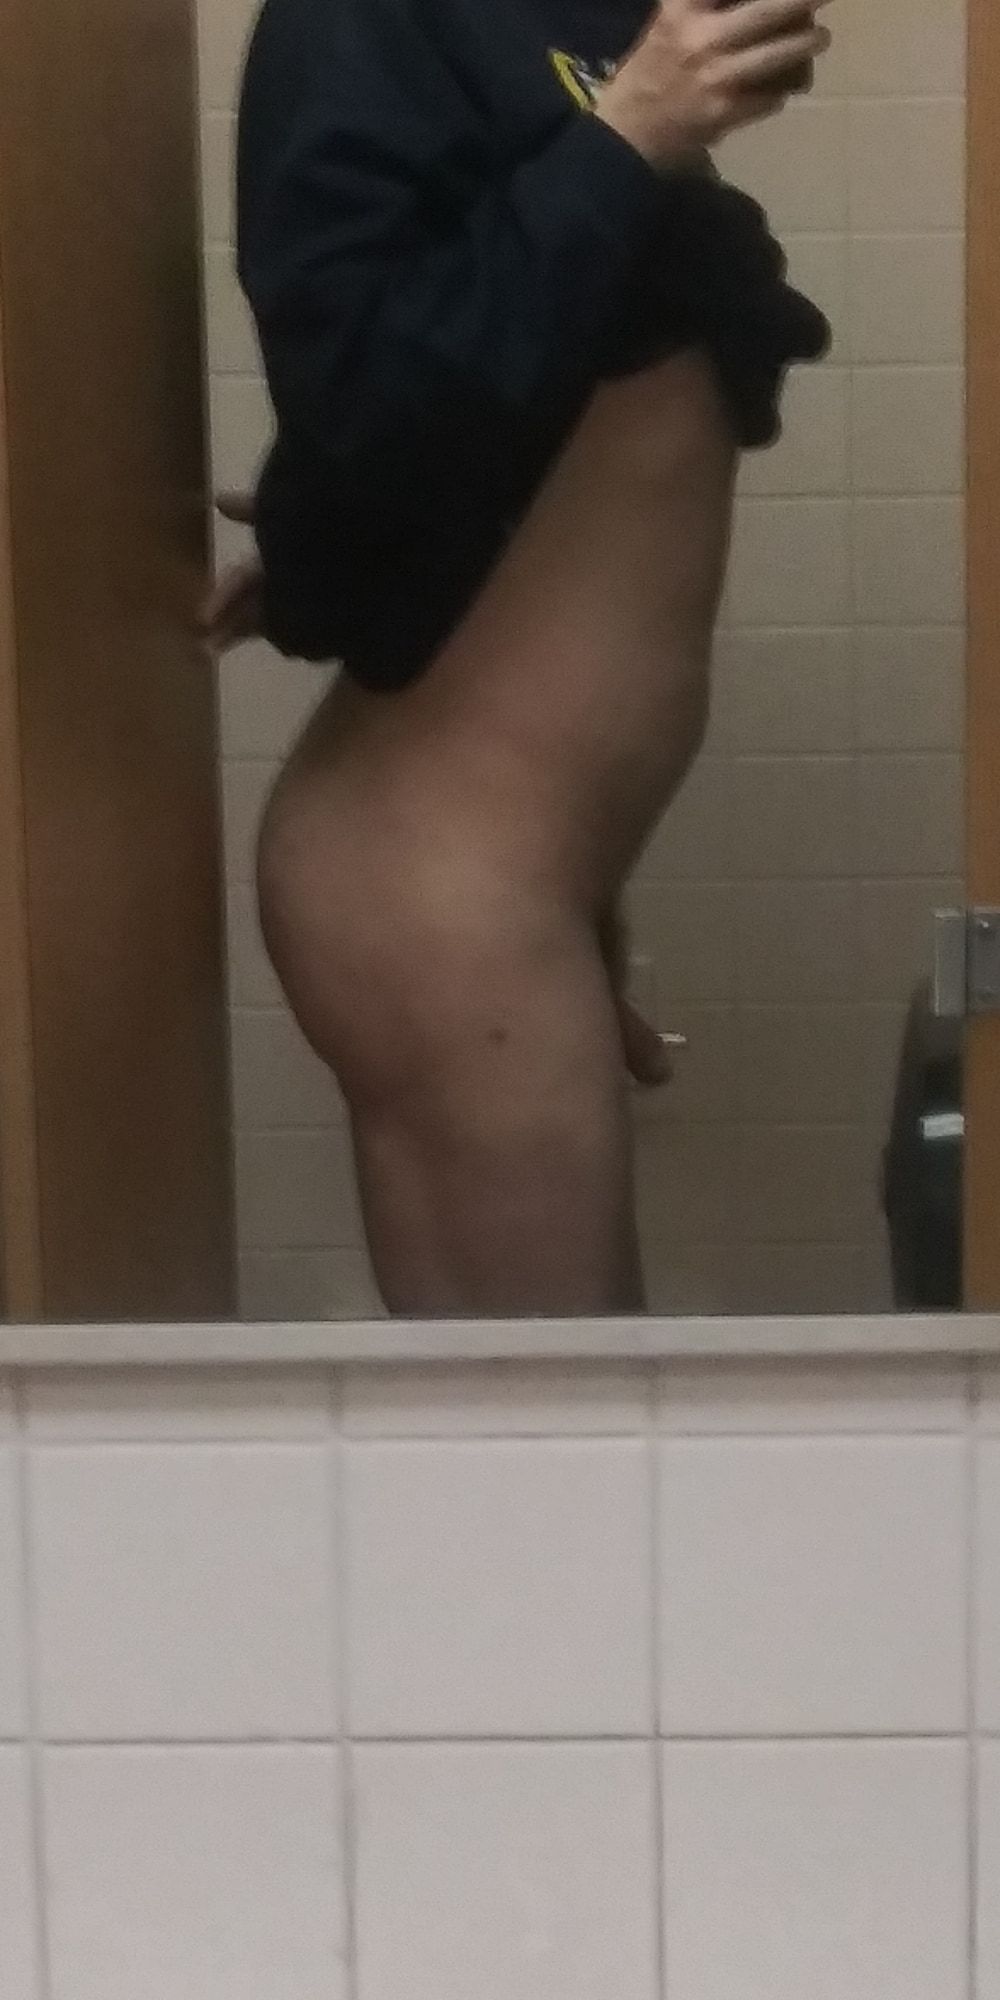 My ass and cock